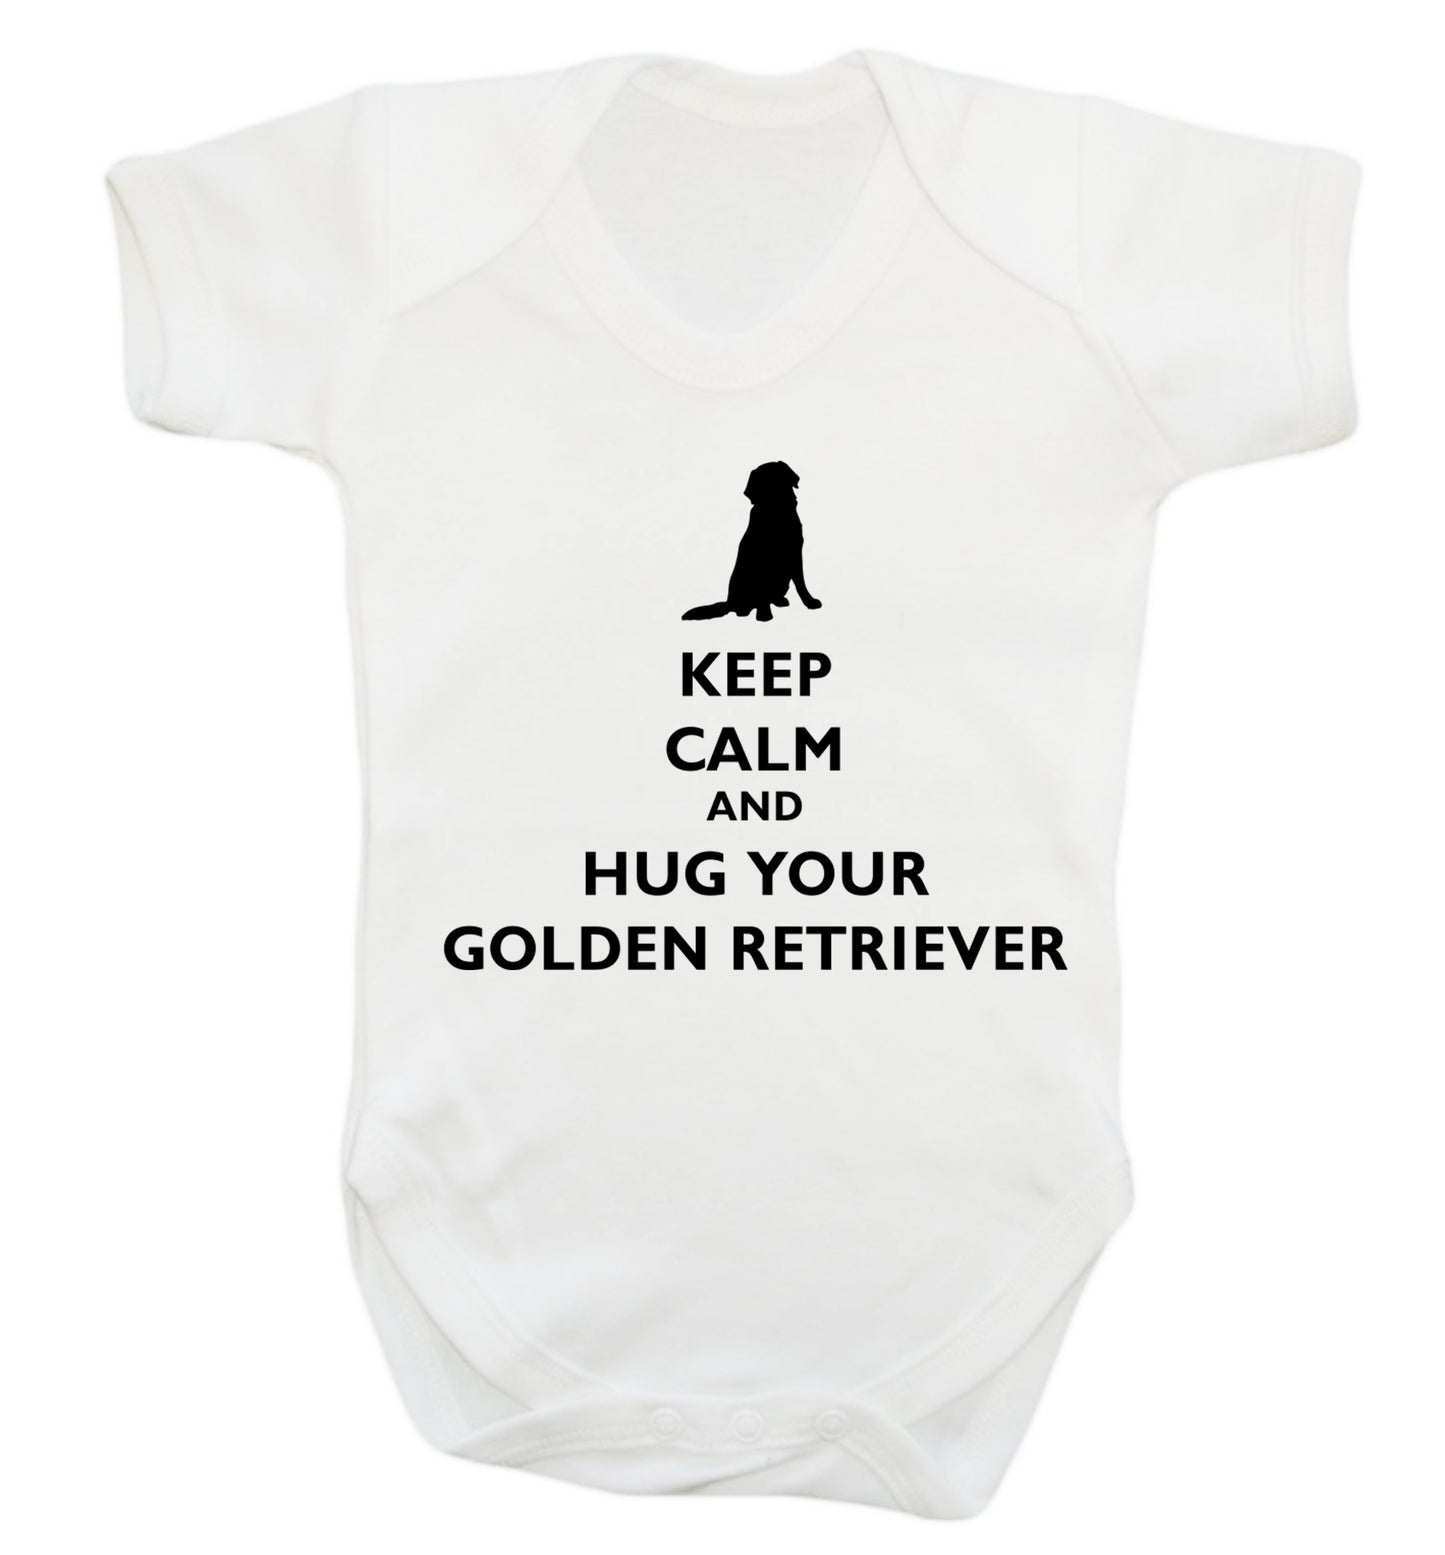 Keep calm and hug your golden retriever Baby Vest white 18-24 months